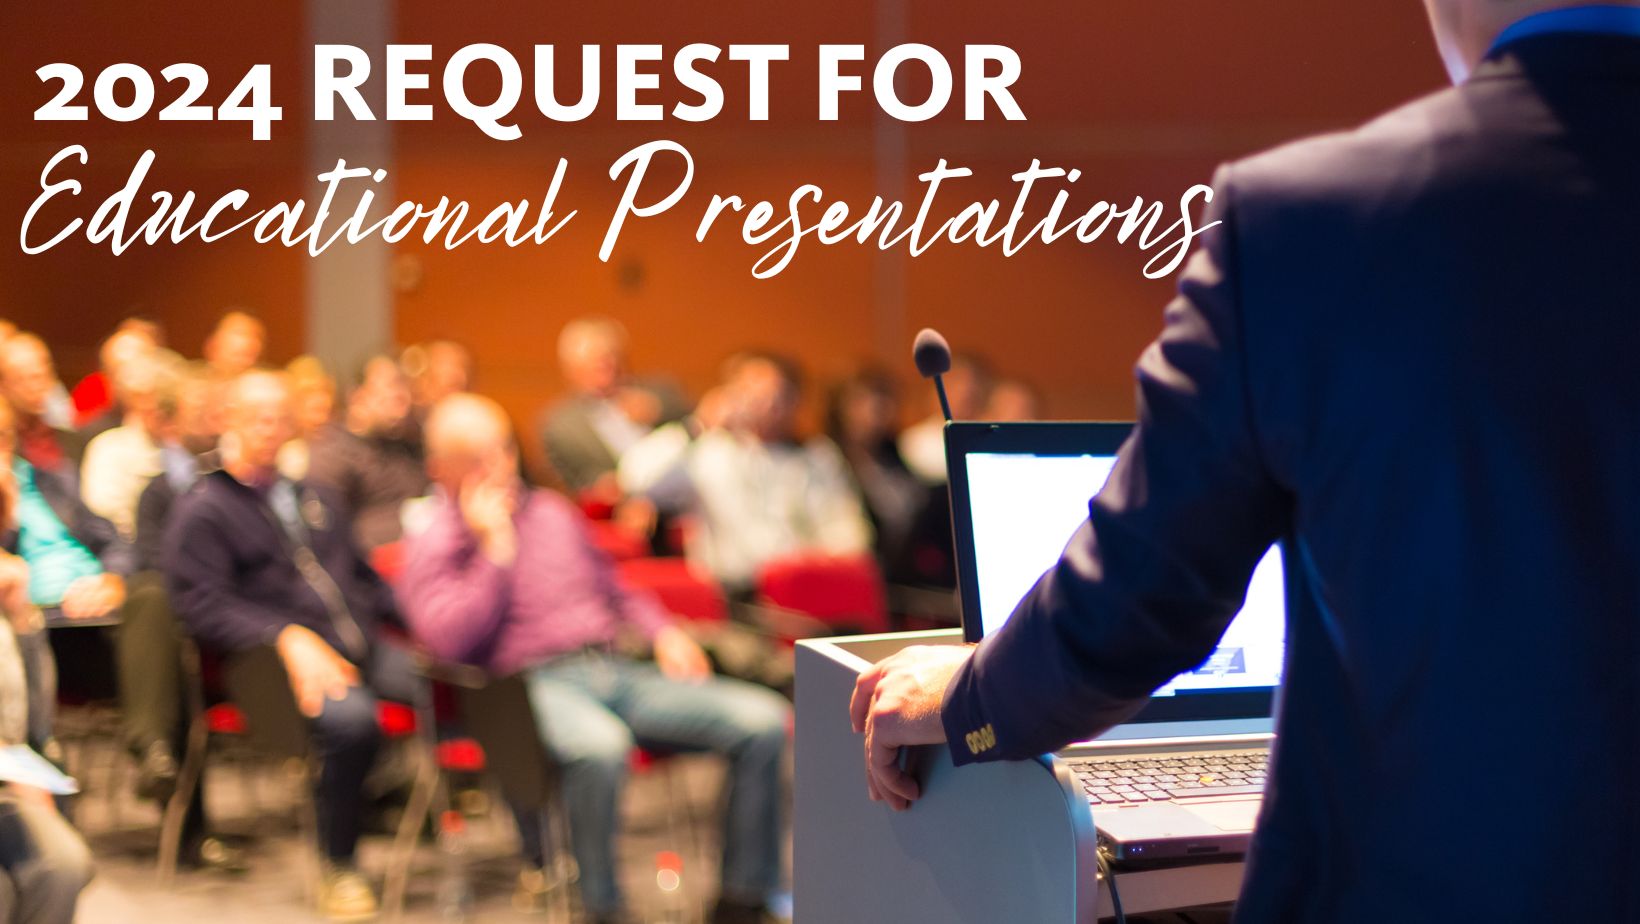 Person giving presentation to a crowded room. 2024 Request for Educational Presentations